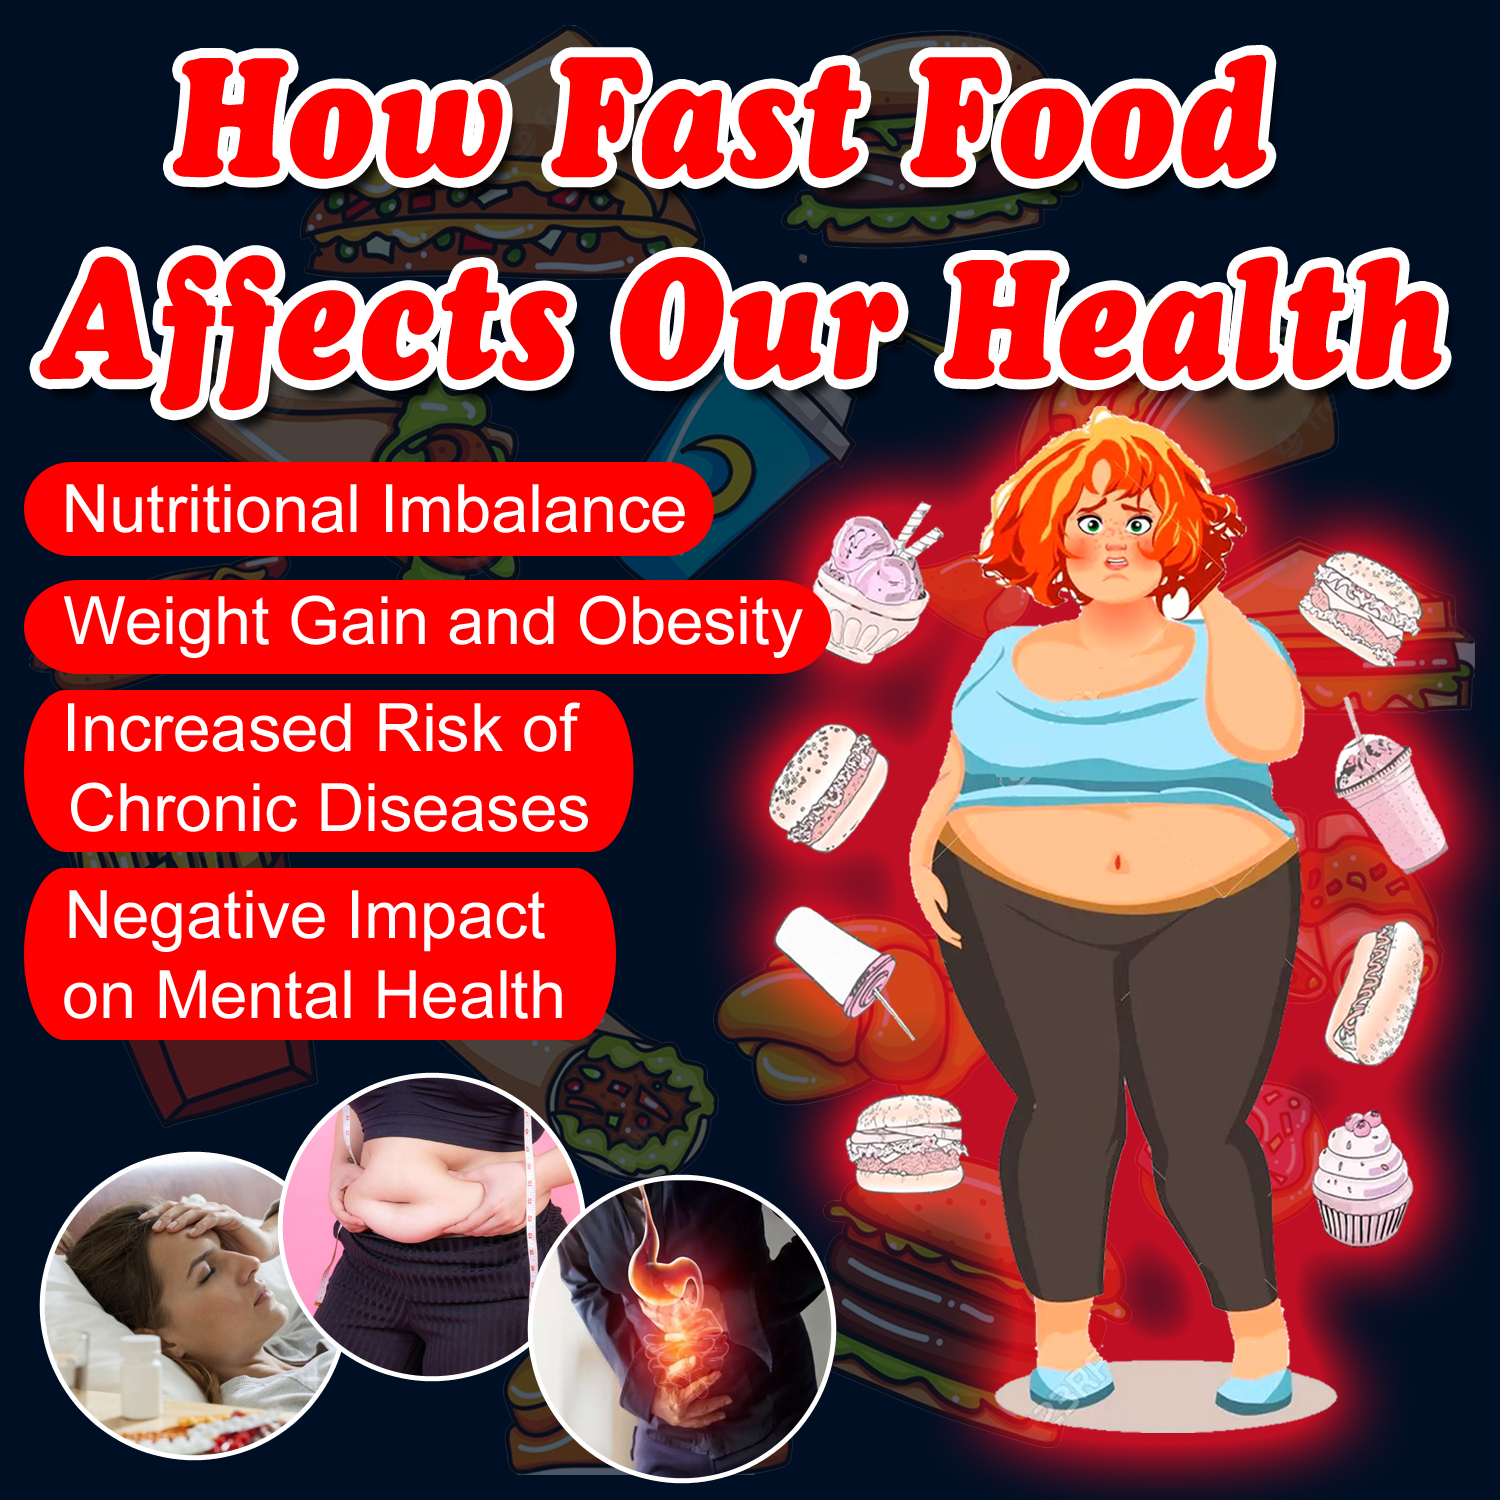 How Fast Food Affects Our Health